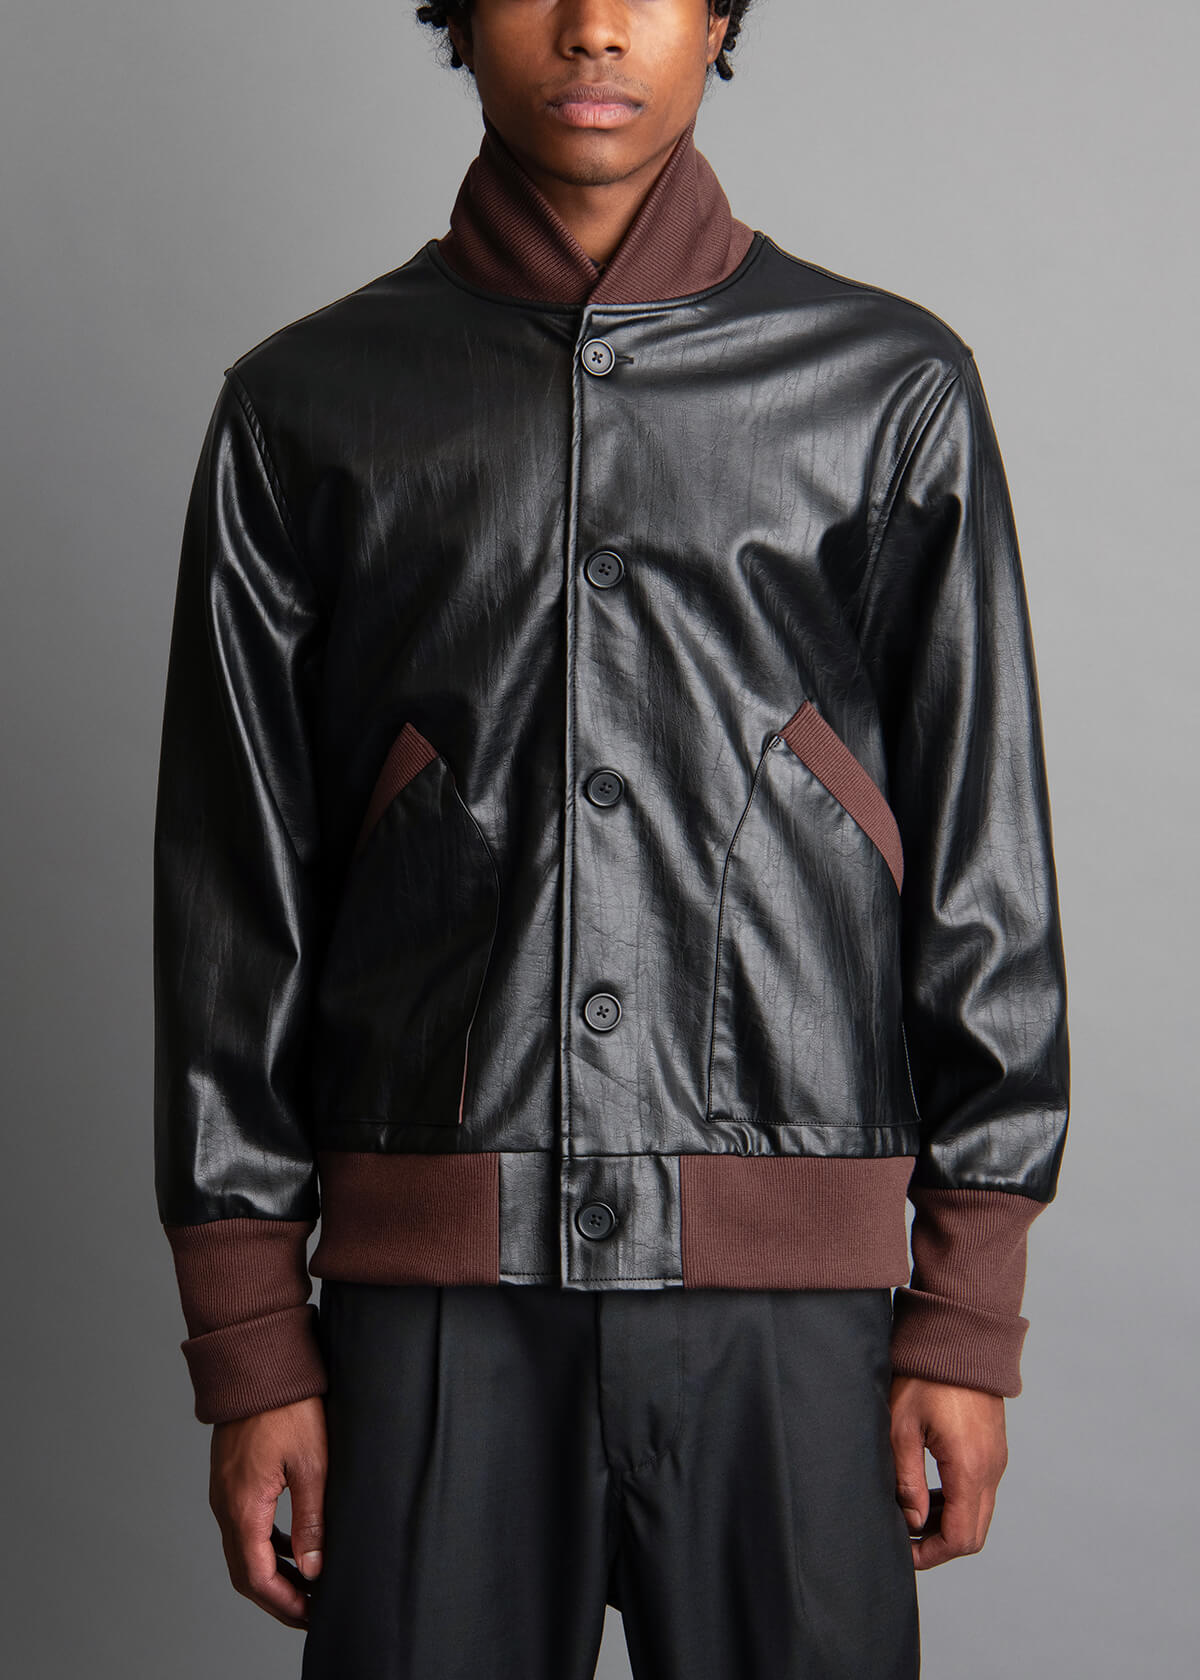 stylish mens vegan leather jacket in a black color